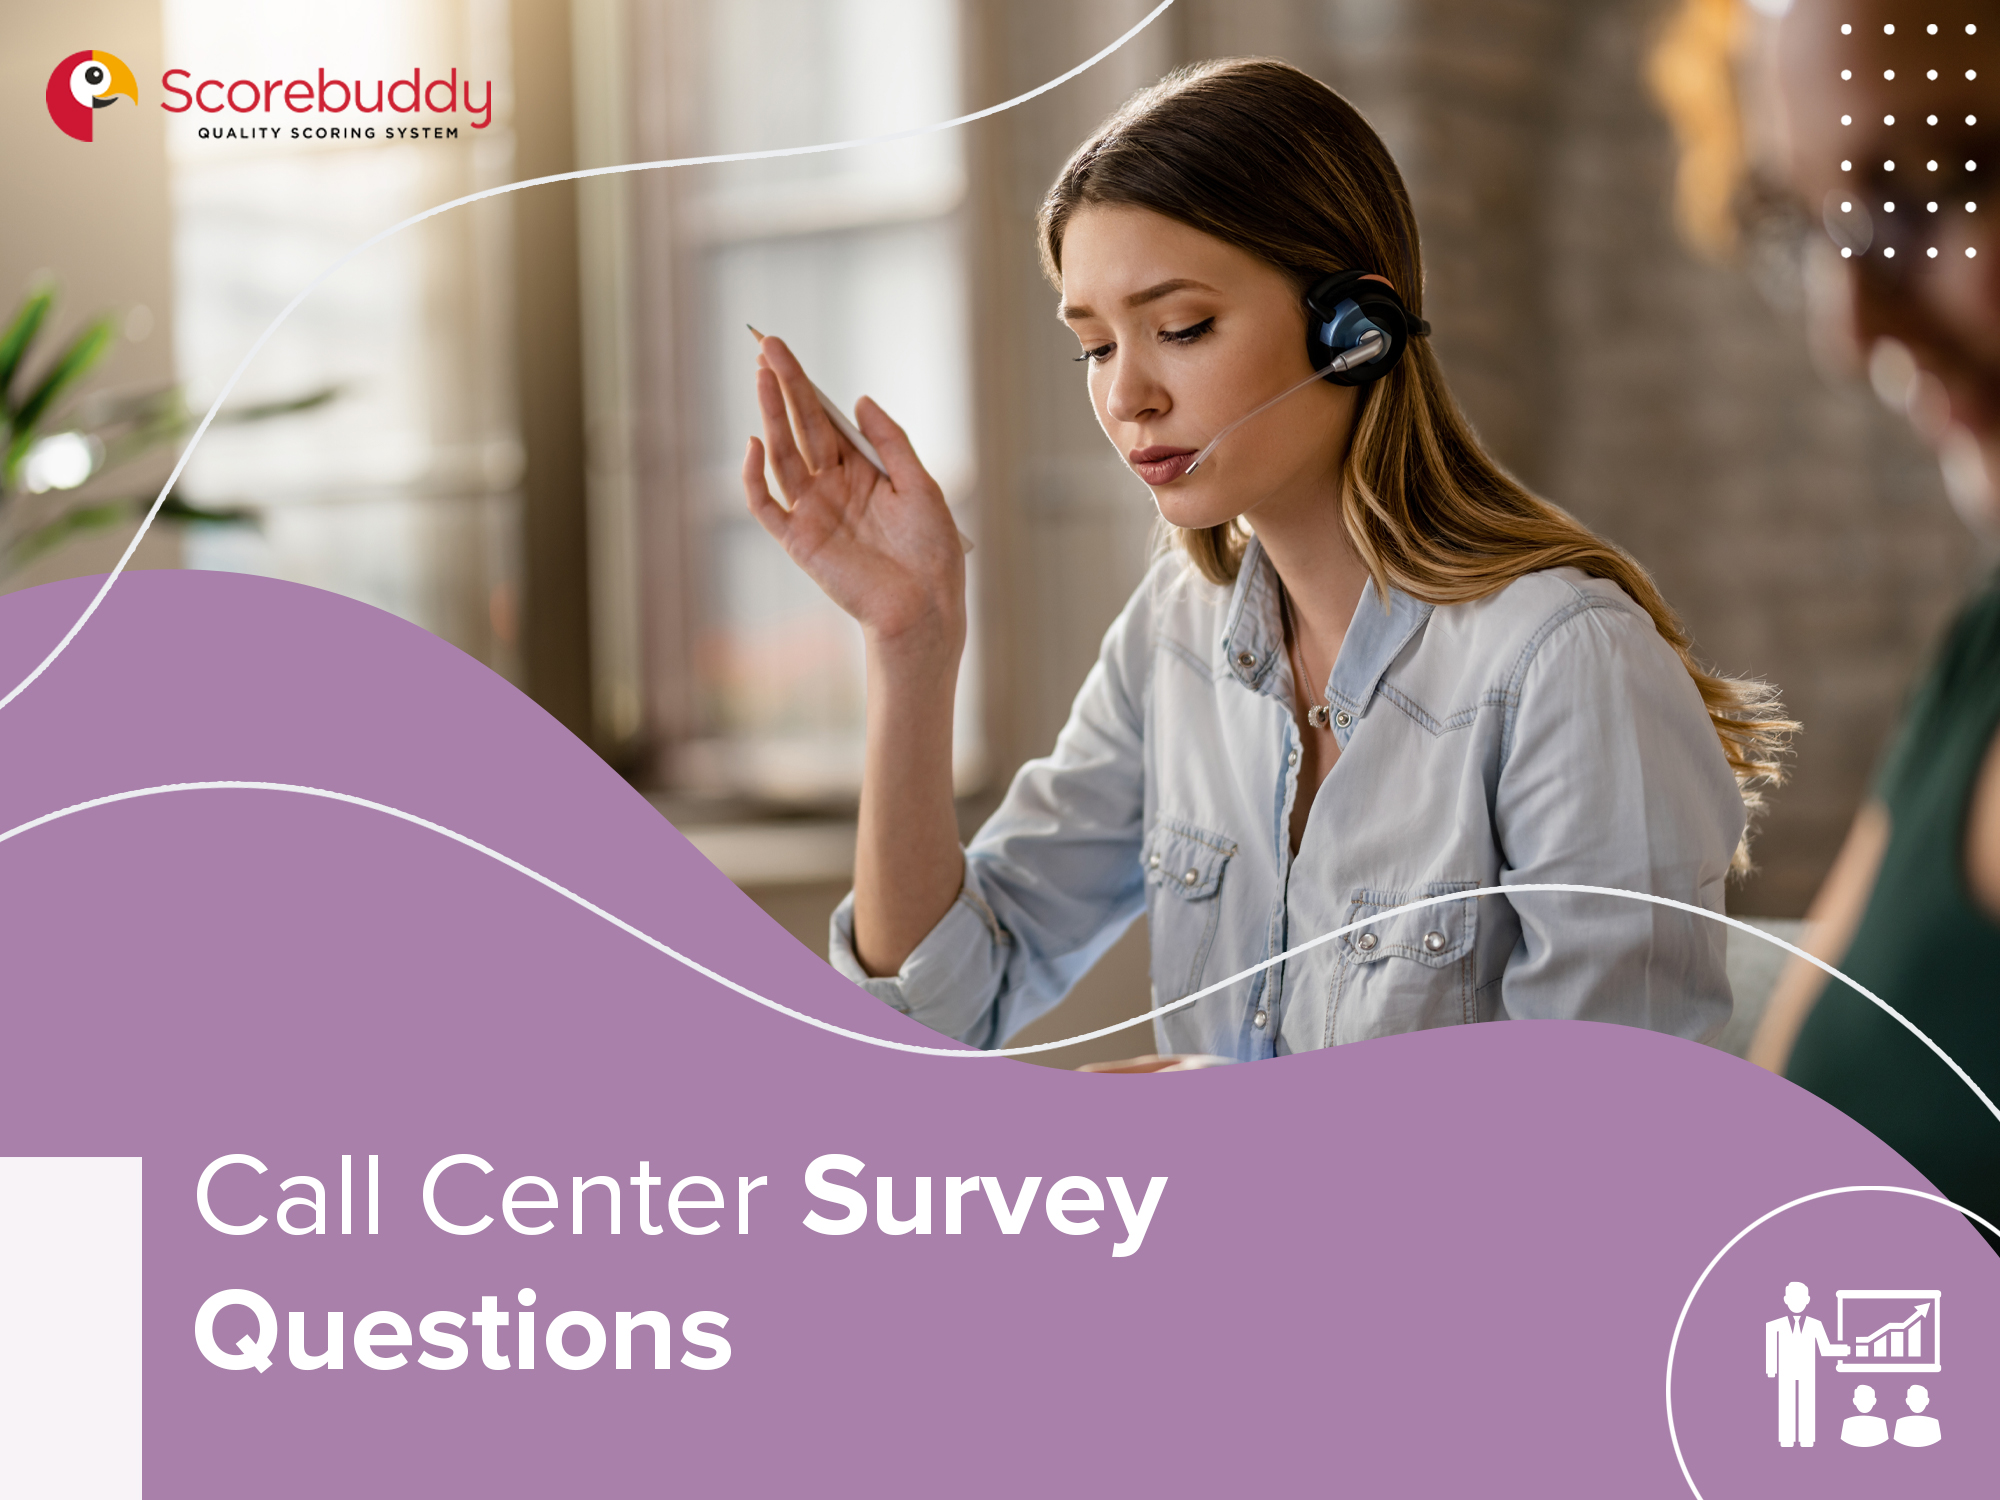 How does Call Center Survey Lead to Better Performance?